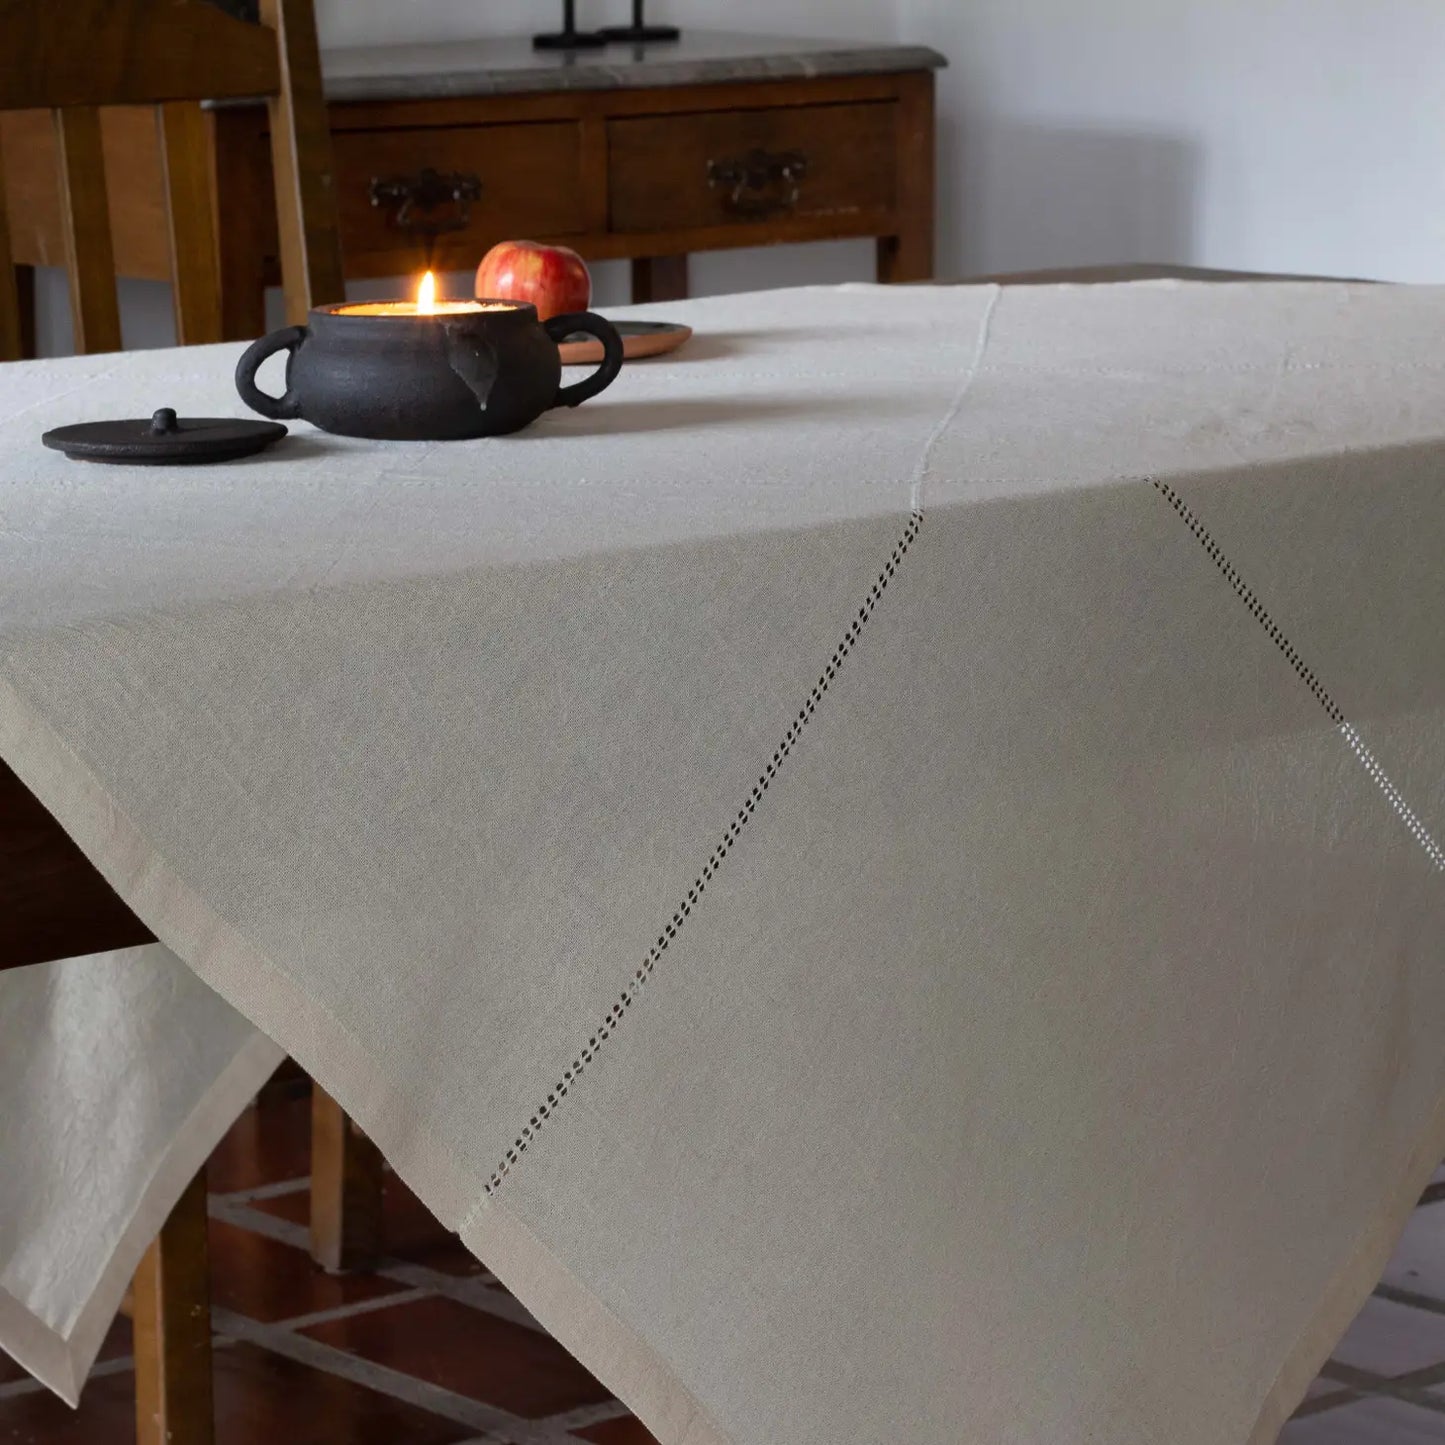 Lienzo Handcrafted Cotton Tablecloth - Ecru